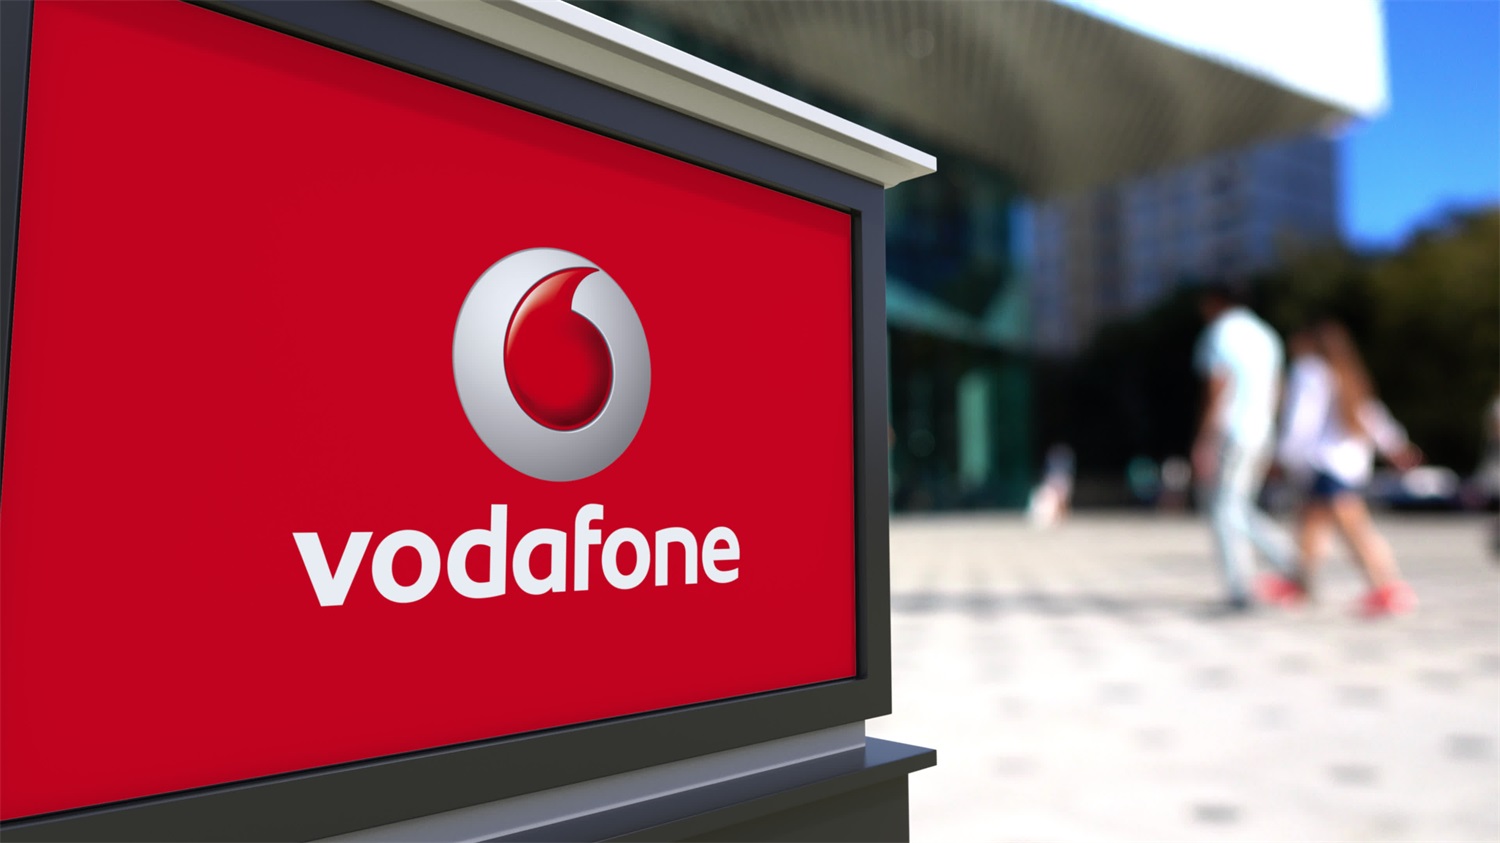 uCloudlink Extends Long-standing Partnership with Vodafone